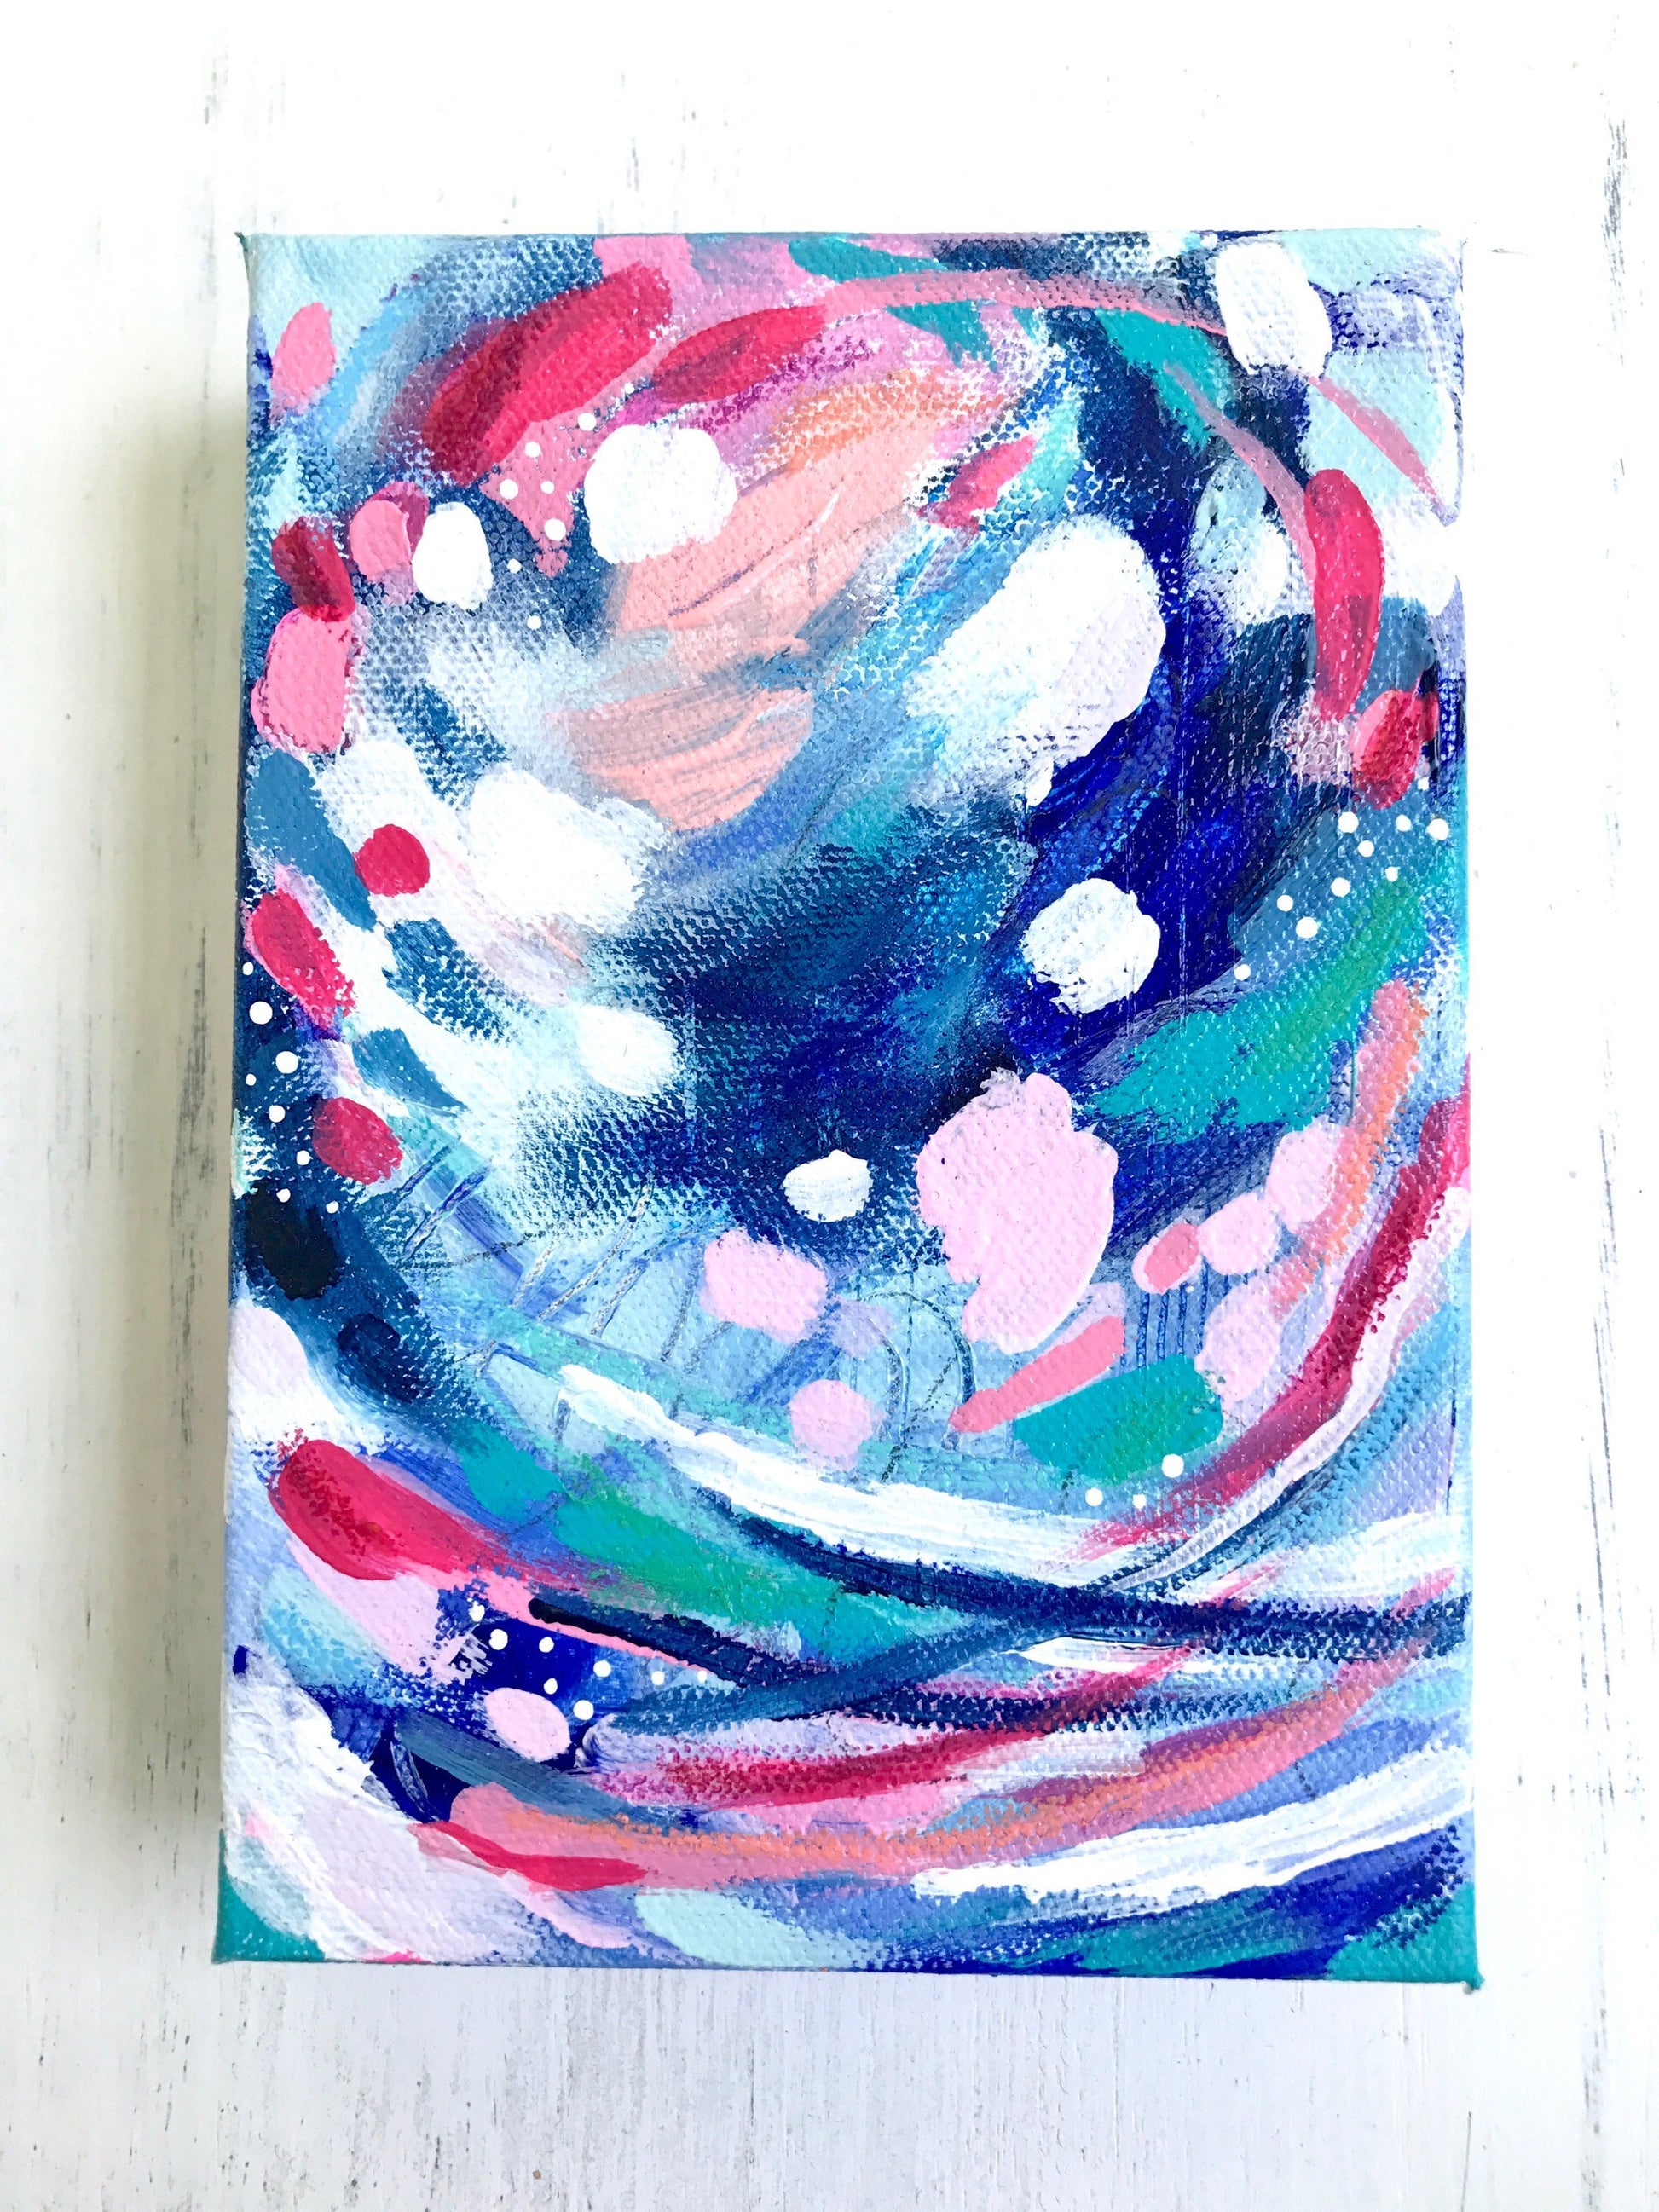 Abstract "Summer Blues" original painting on 5x7 inch canvas / "It Had to be Blue" / Vibrant Home Decor / Modern Decor / Blue Inspired Art - Bethany Joy Art